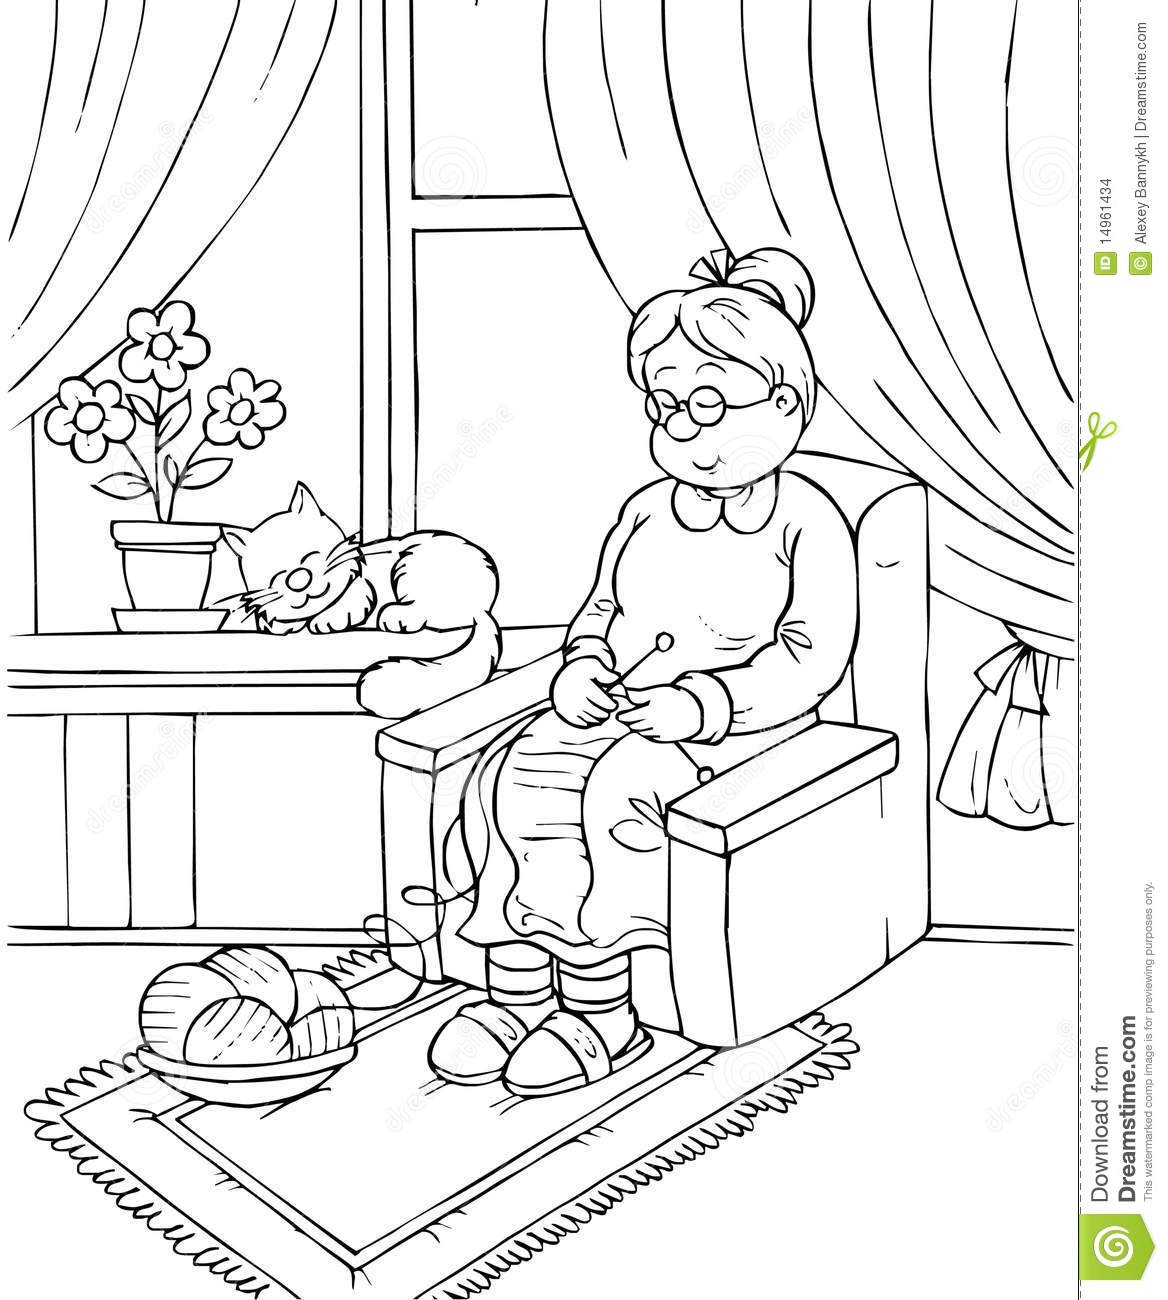 Black And White Illustration  Coloring Page   Granny Sleeps In An